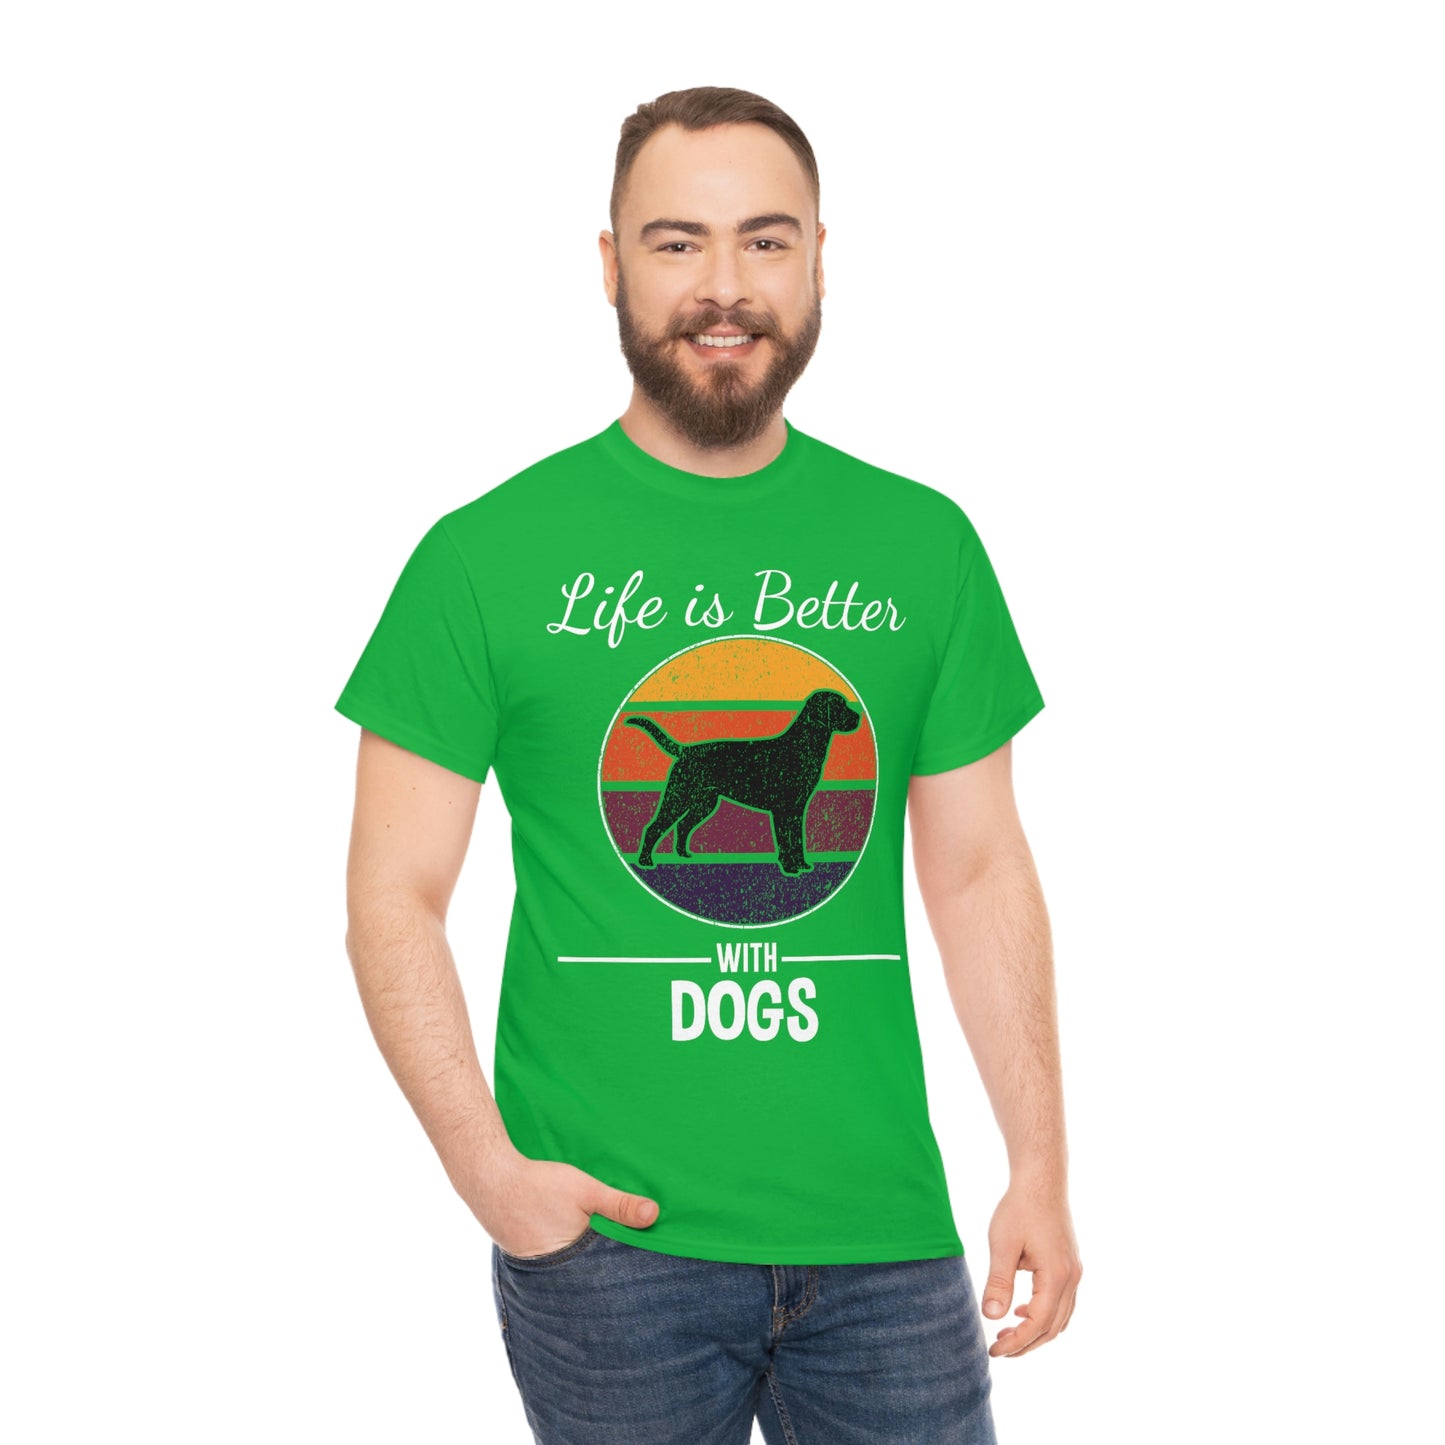 Life is better with Dogs Cotton Tee